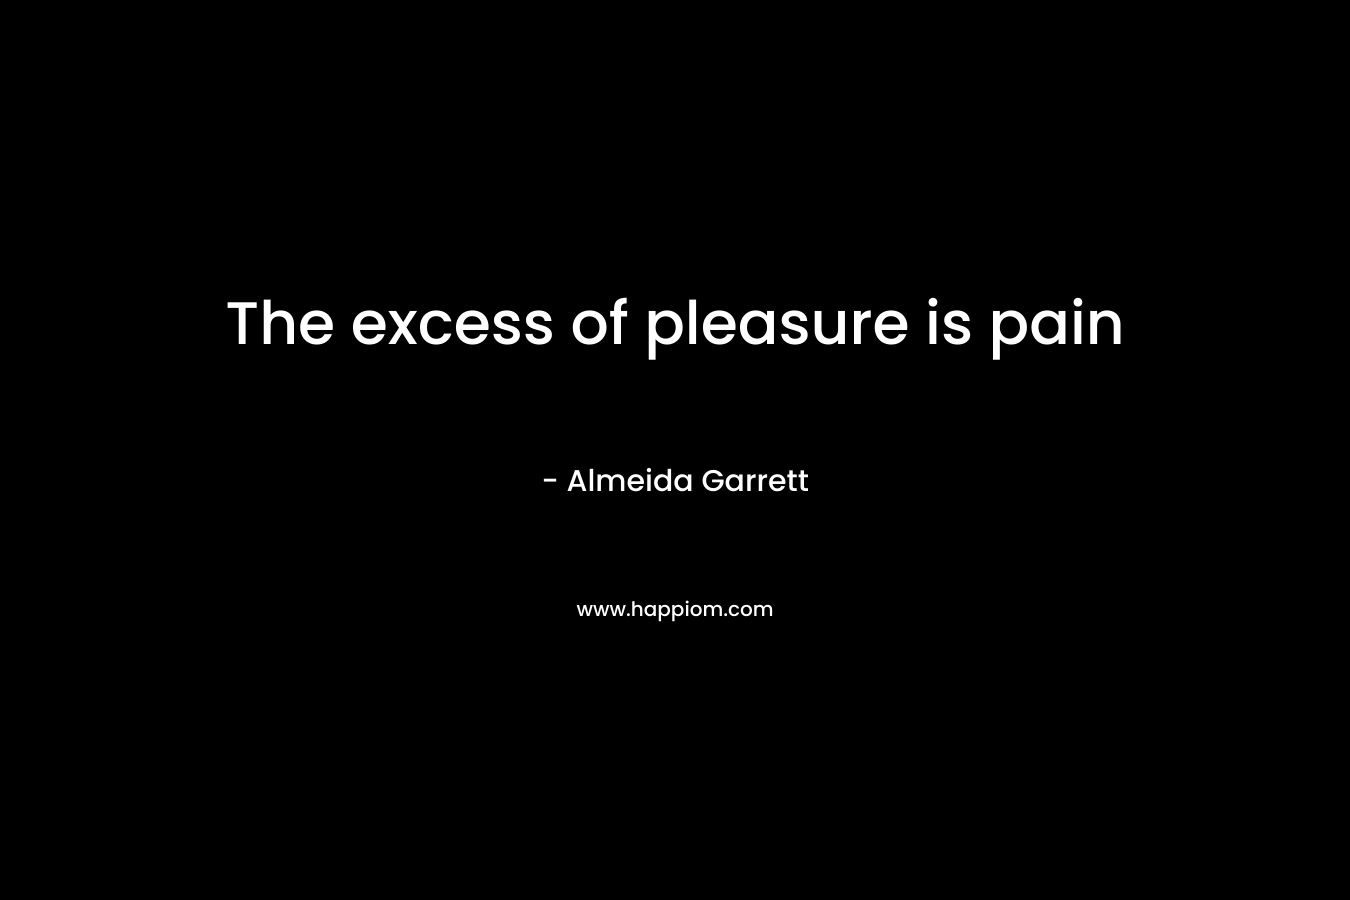 The excess of pleasure is pain